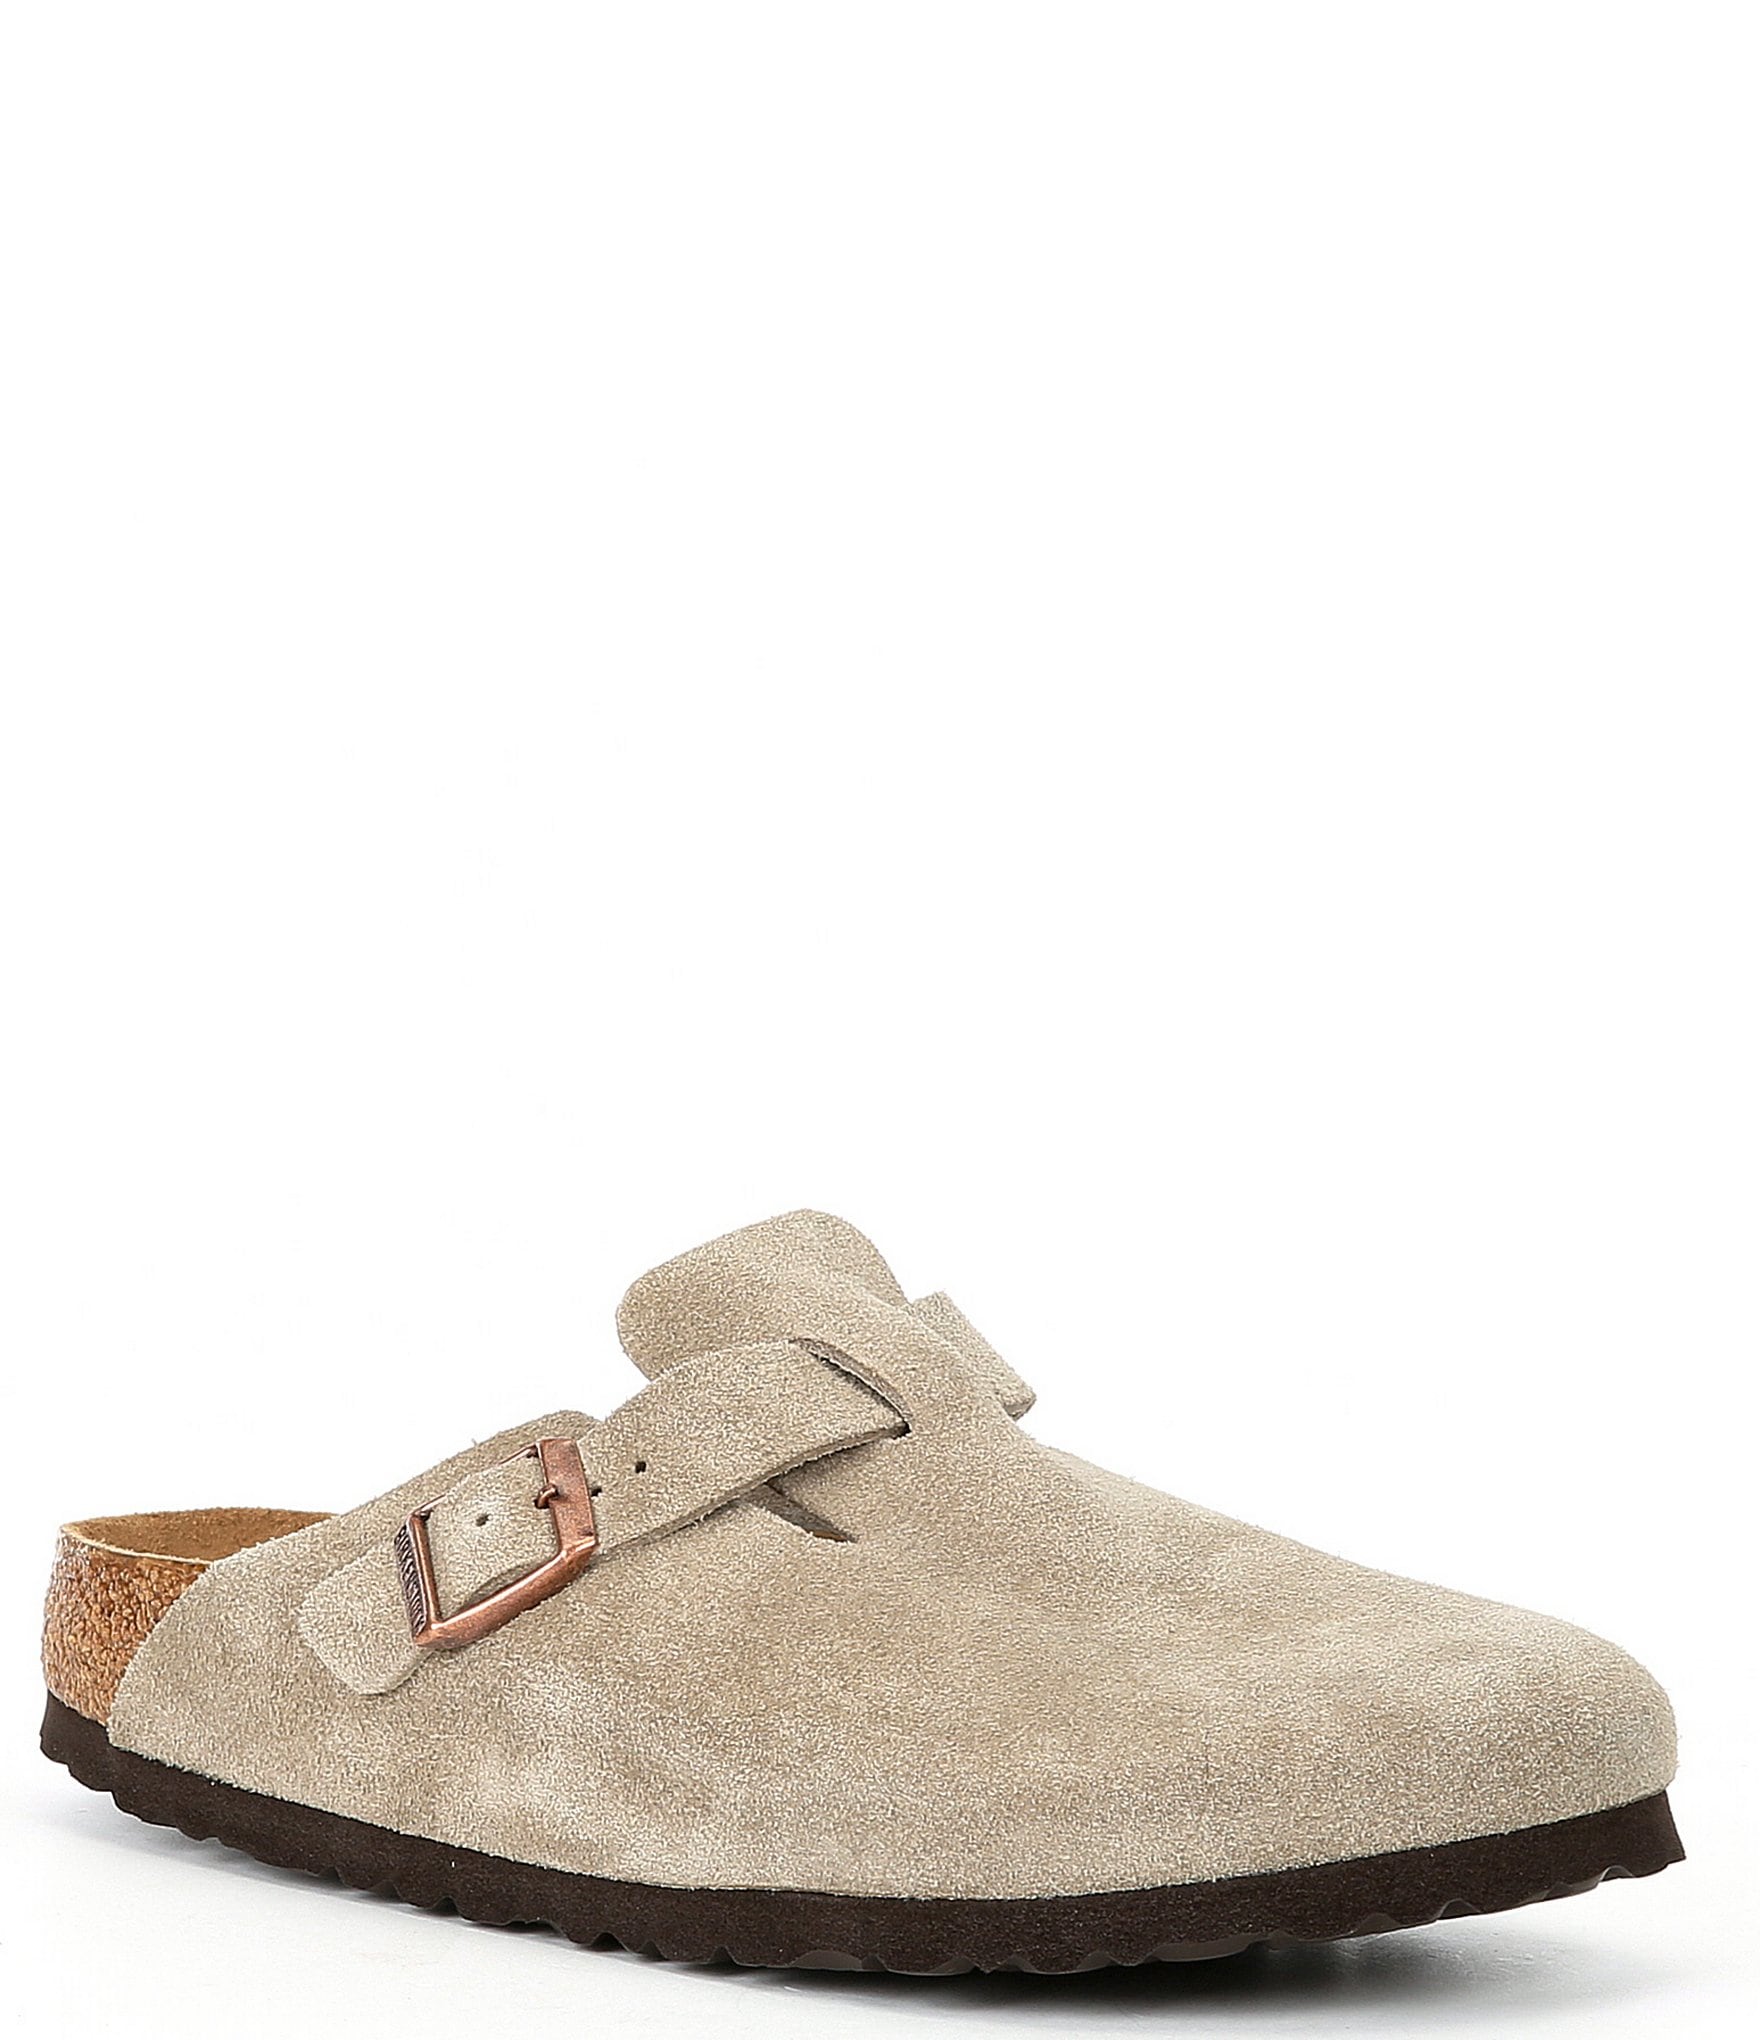 Women's Trud TAUPE, Buy Women's Trud TAUPE here